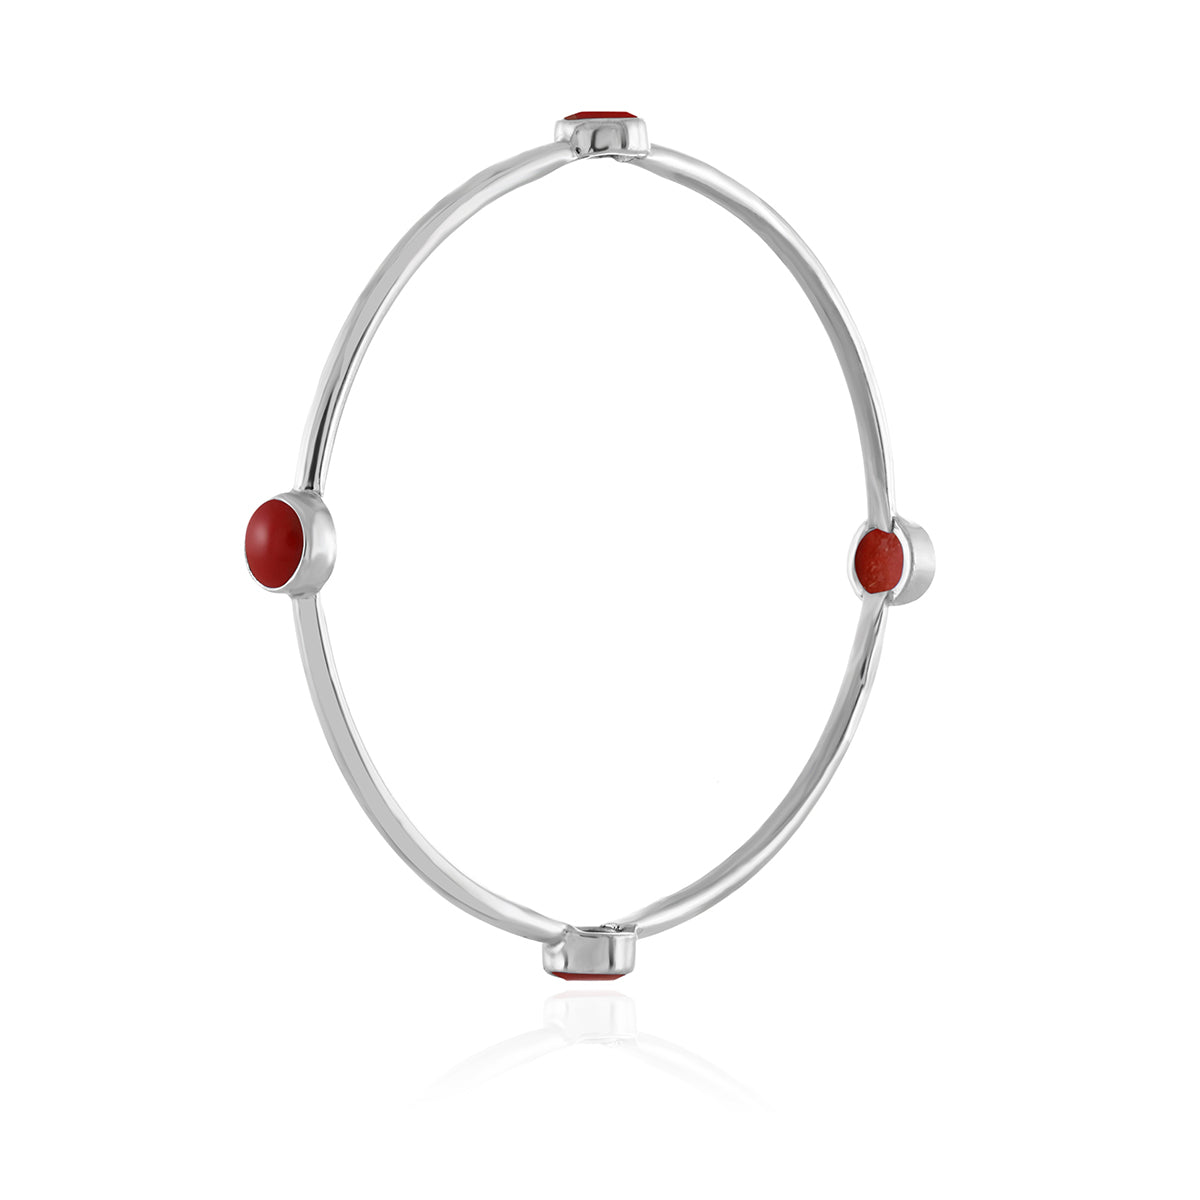 Sterling Silver Coral Bangles